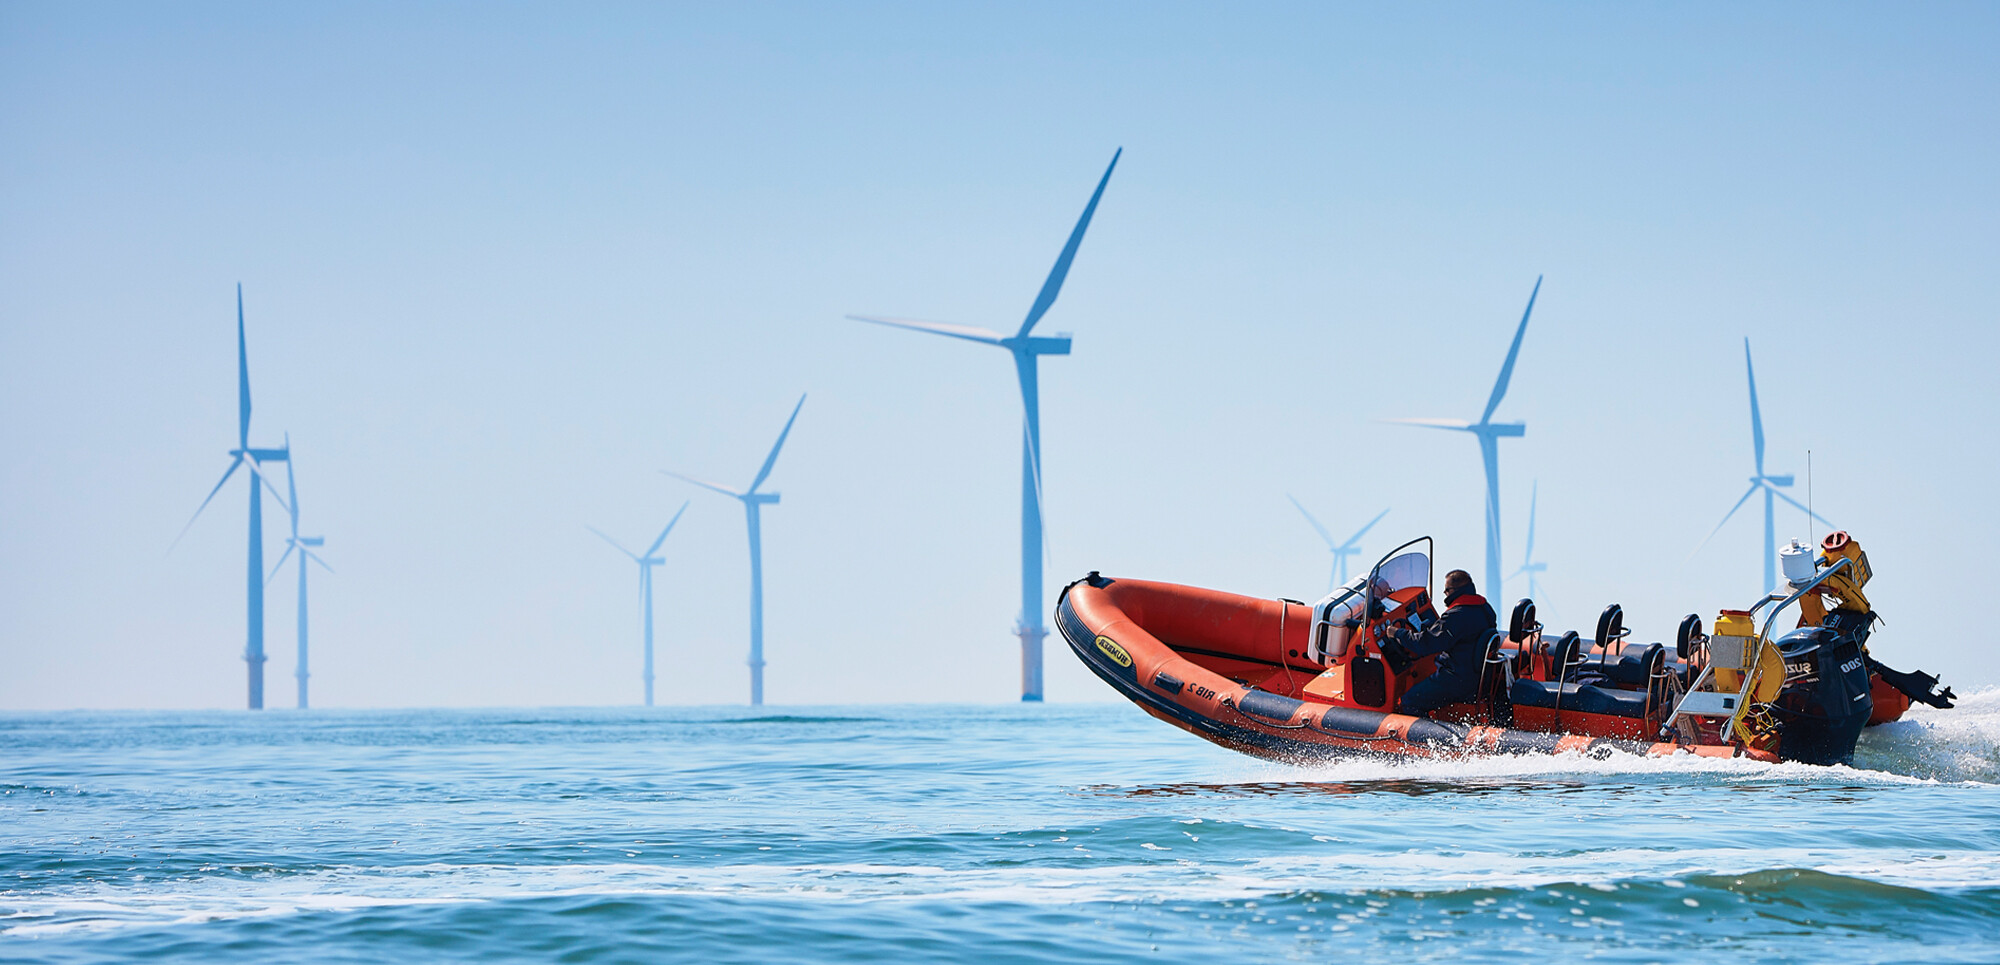 commercial powerboat on calm sea with wind farm in background